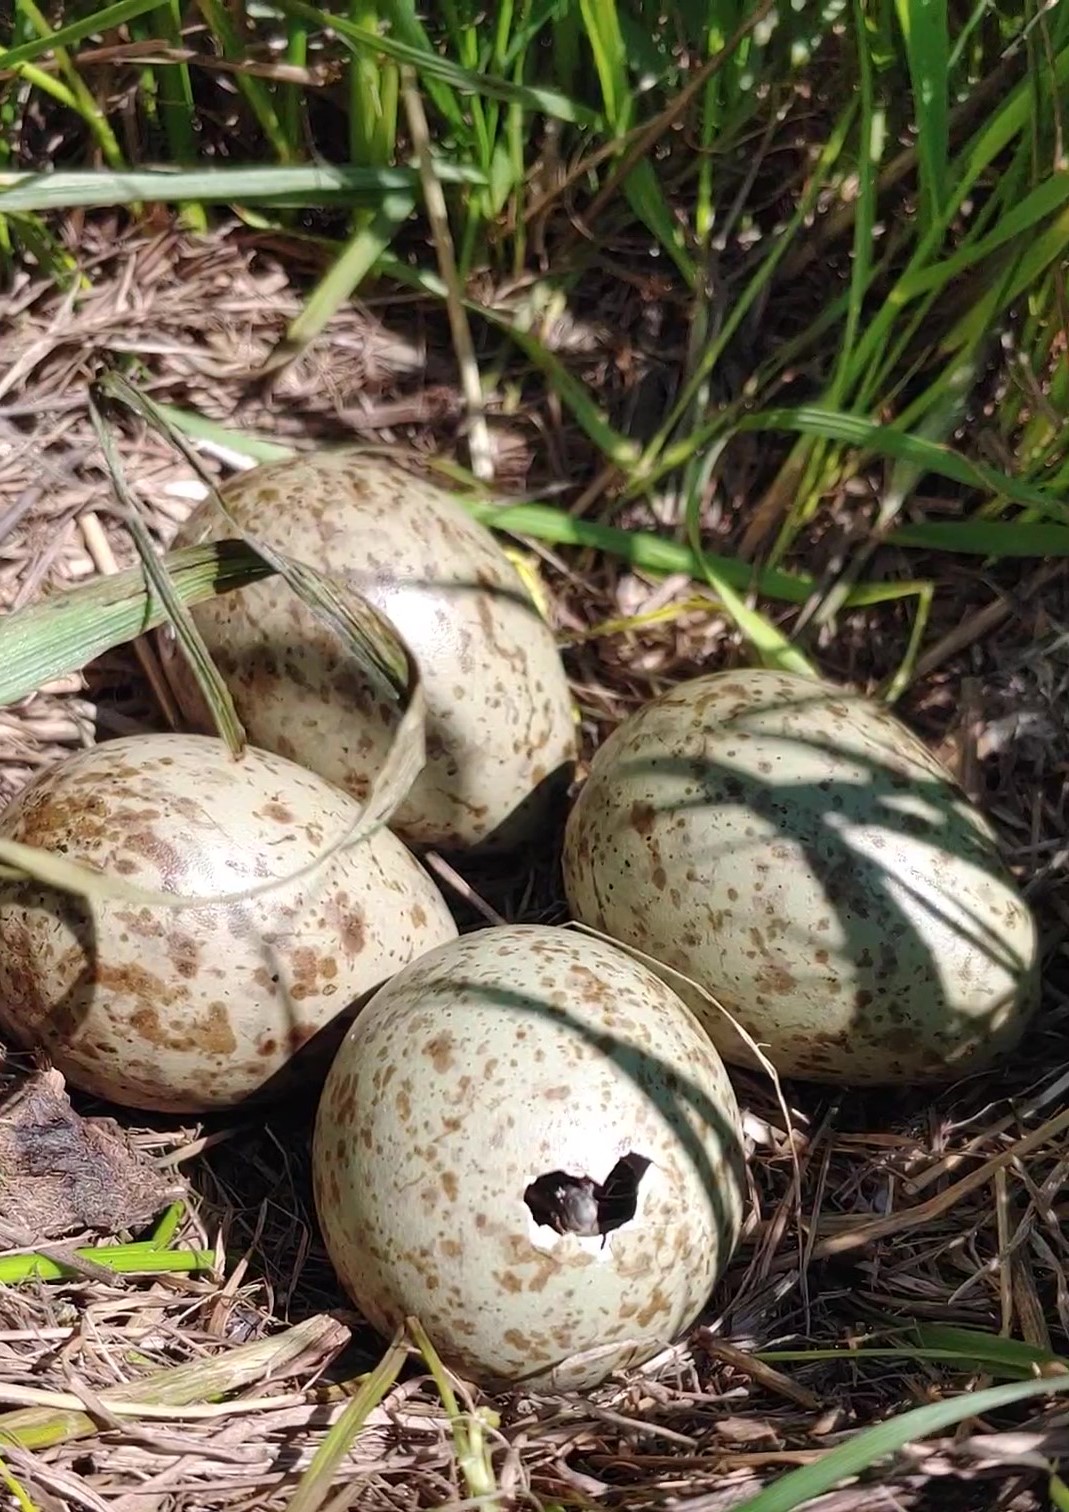 Four speckled eggs. One egg has a cracked hole in it with a small bird bill poking out